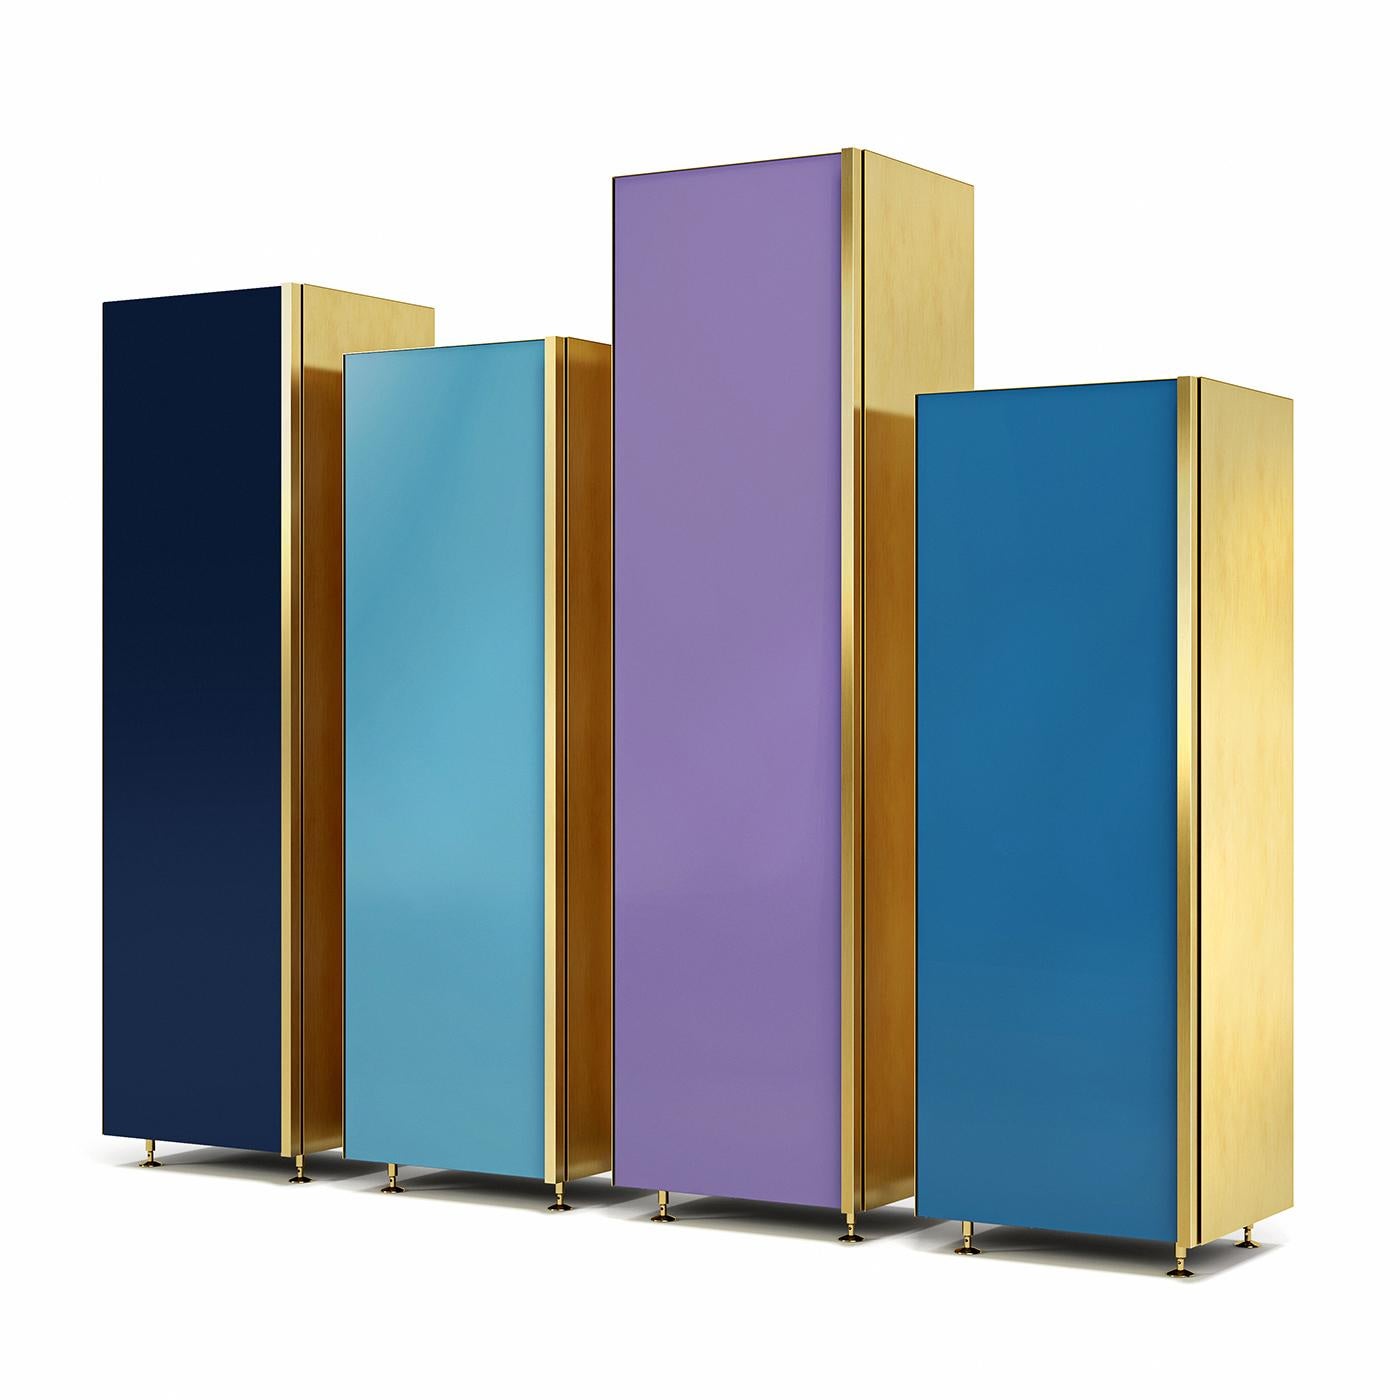 Evoking the charm of underwater color palettes, this set comprises four cupboards each measuring 55 cm in width, 45 cm in depth, and respectively 185, 170, 200, and 155 cm in height proceeding from left to right. Their wooden frame flaunts sides in